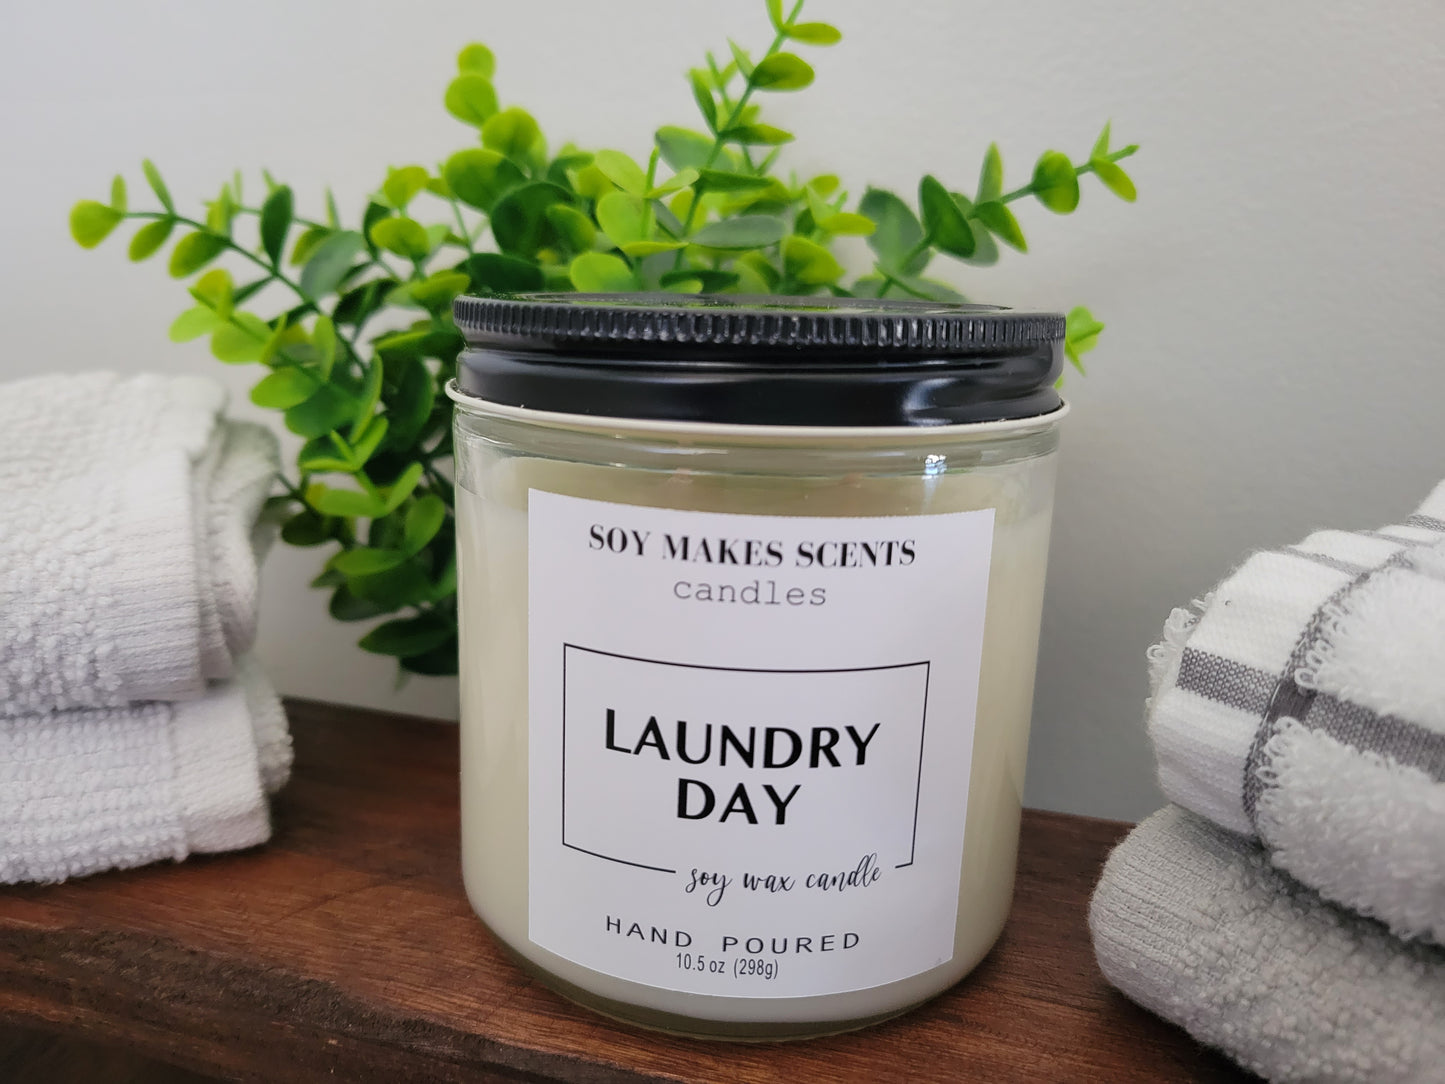 Laundry Day 10.5oz soy wax candle